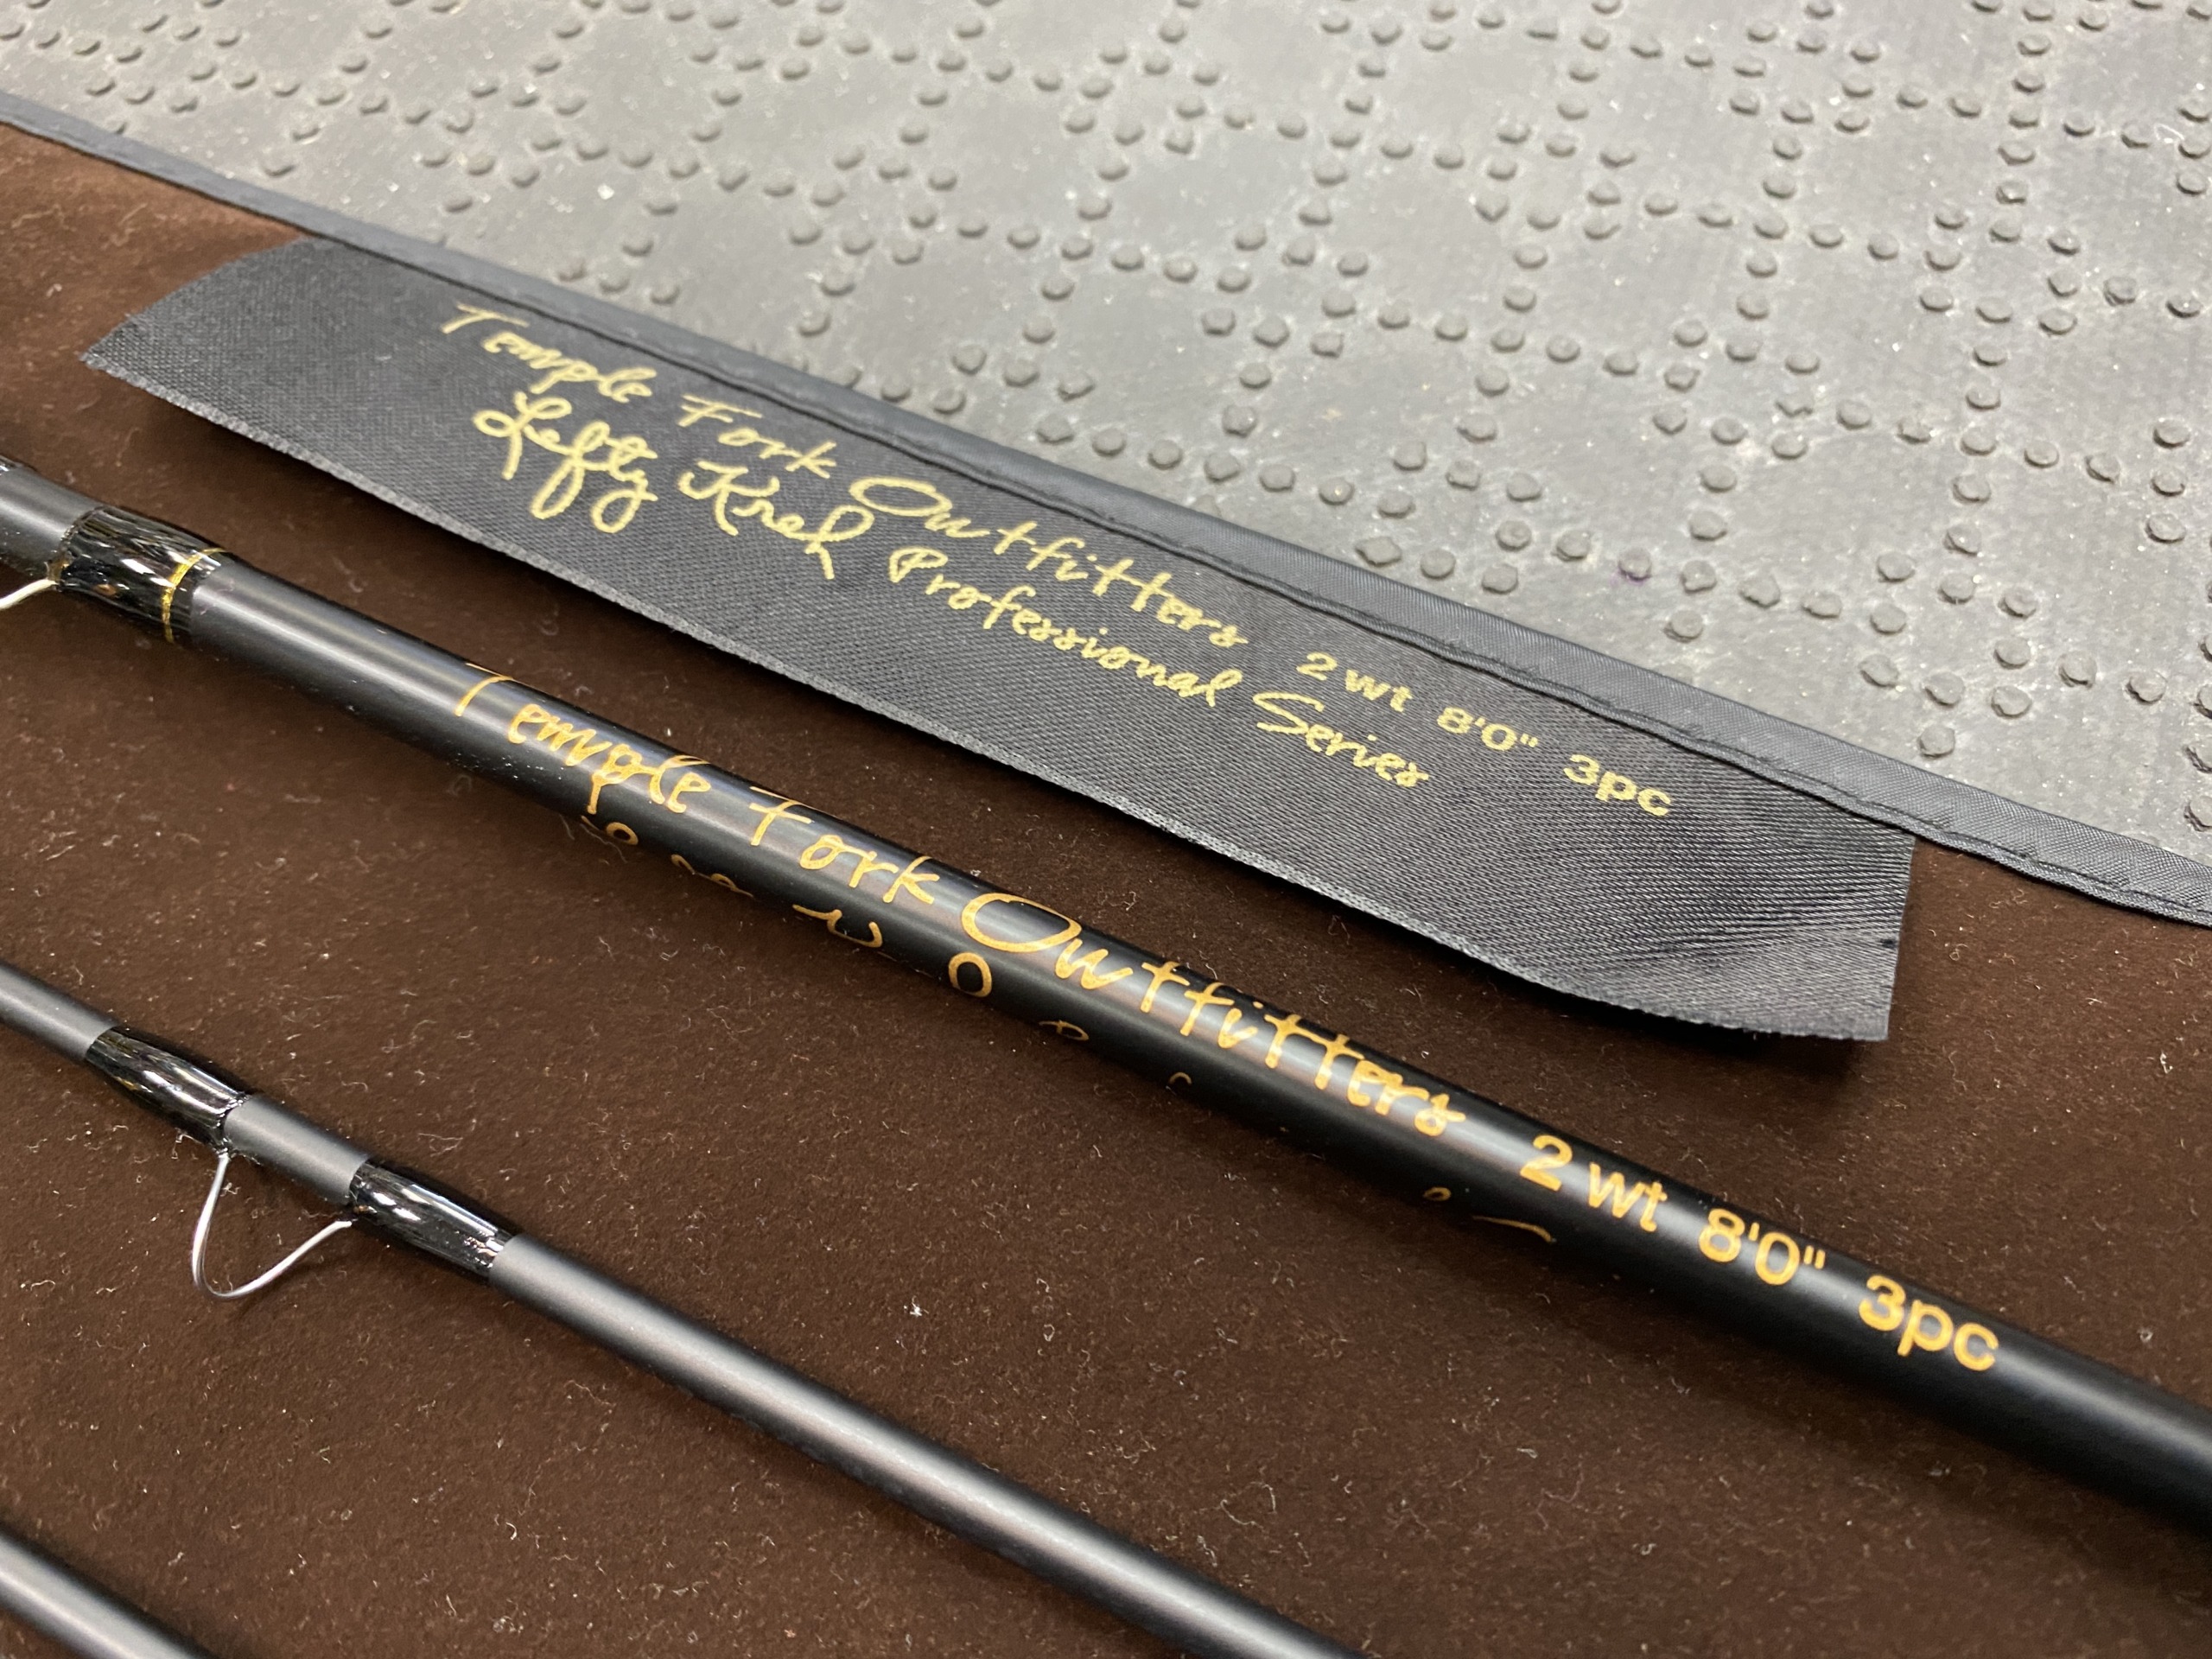 TFO - Temple Fork Outfitters - Lefty Kreh Pro Series - 8' - 3Pc - 2Wt - Fly Rod - LIKE NEW! - $150